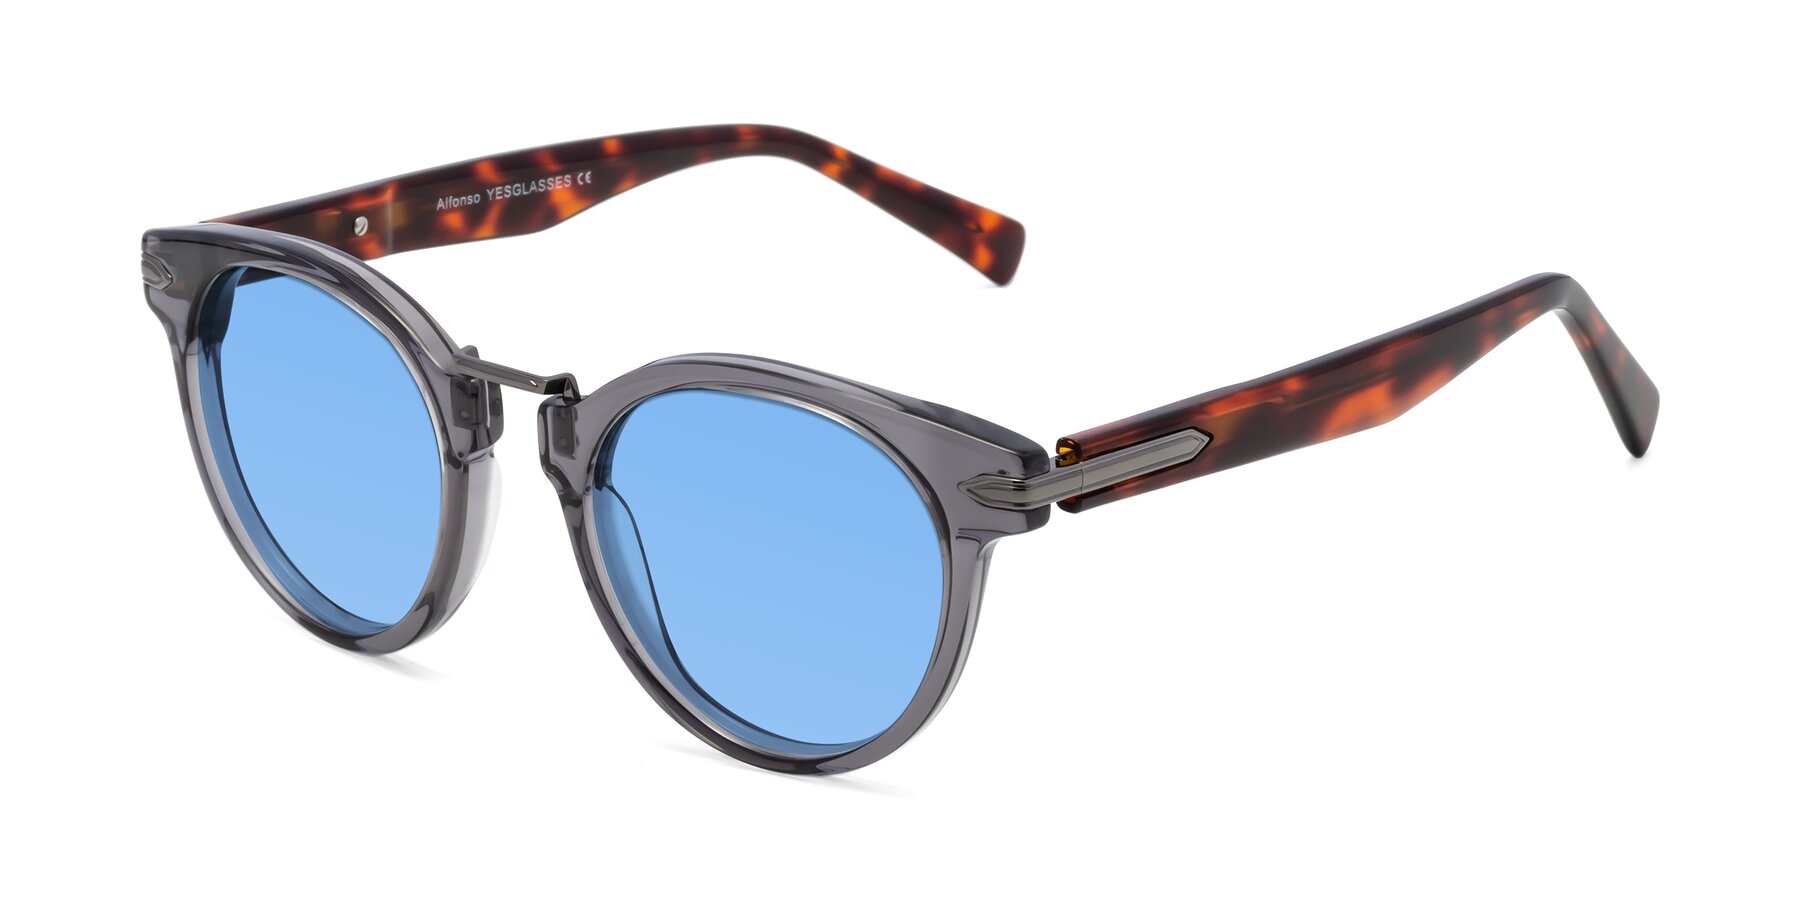 Angle of Alfonso in Gray /Tortoise with Medium Blue Tinted Lenses